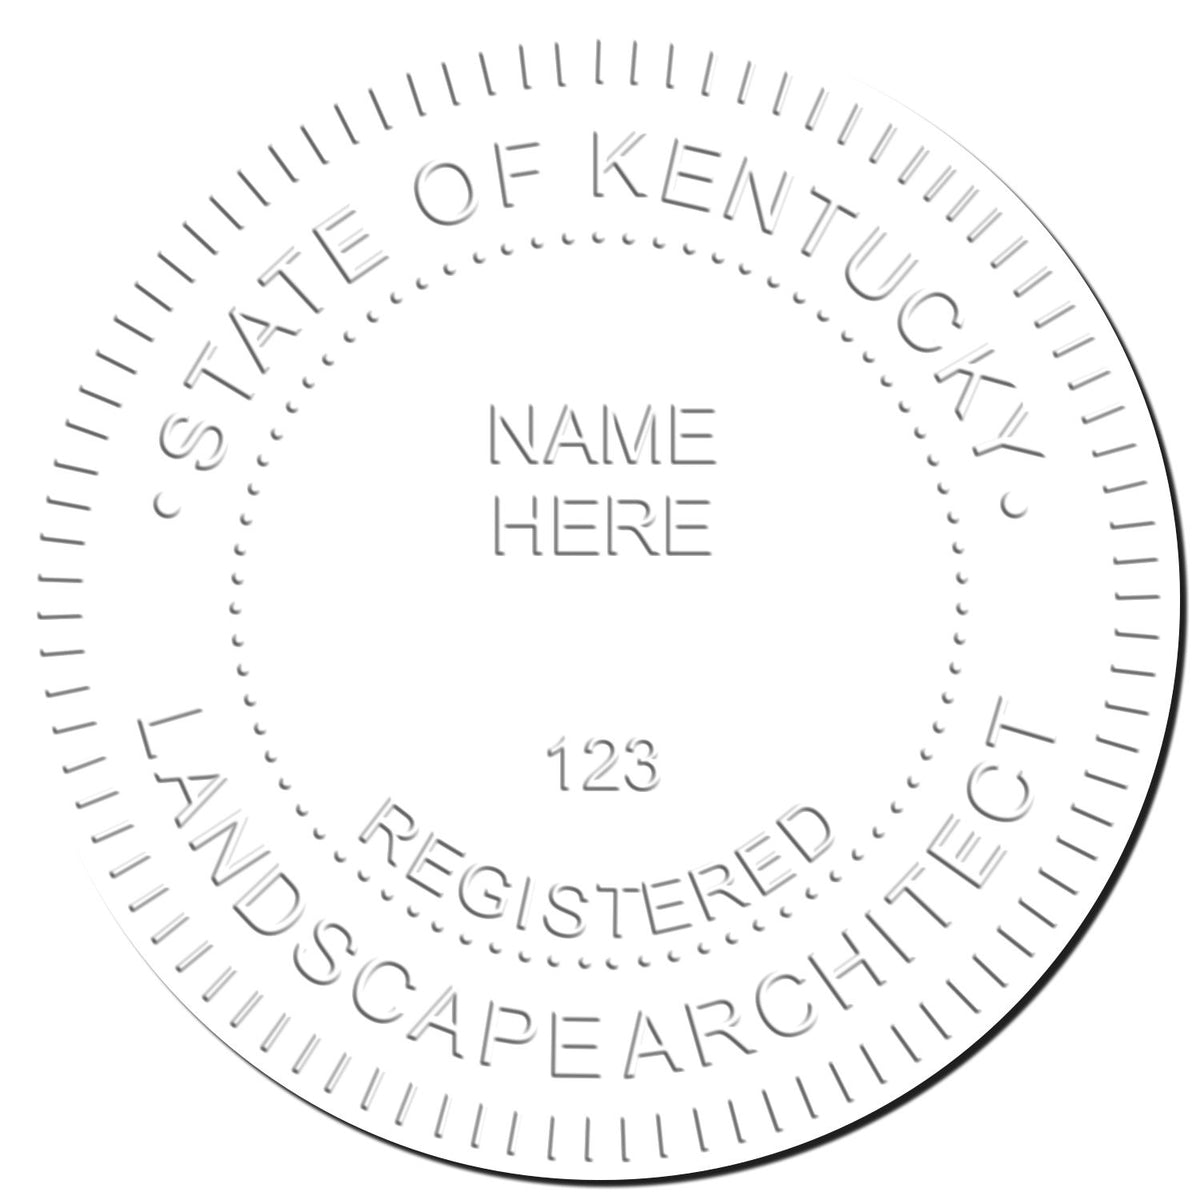 This paper is stamped with a sample imprint of the Hybrid Kentucky Landscape Architect Seal, signifying its quality and reliability.